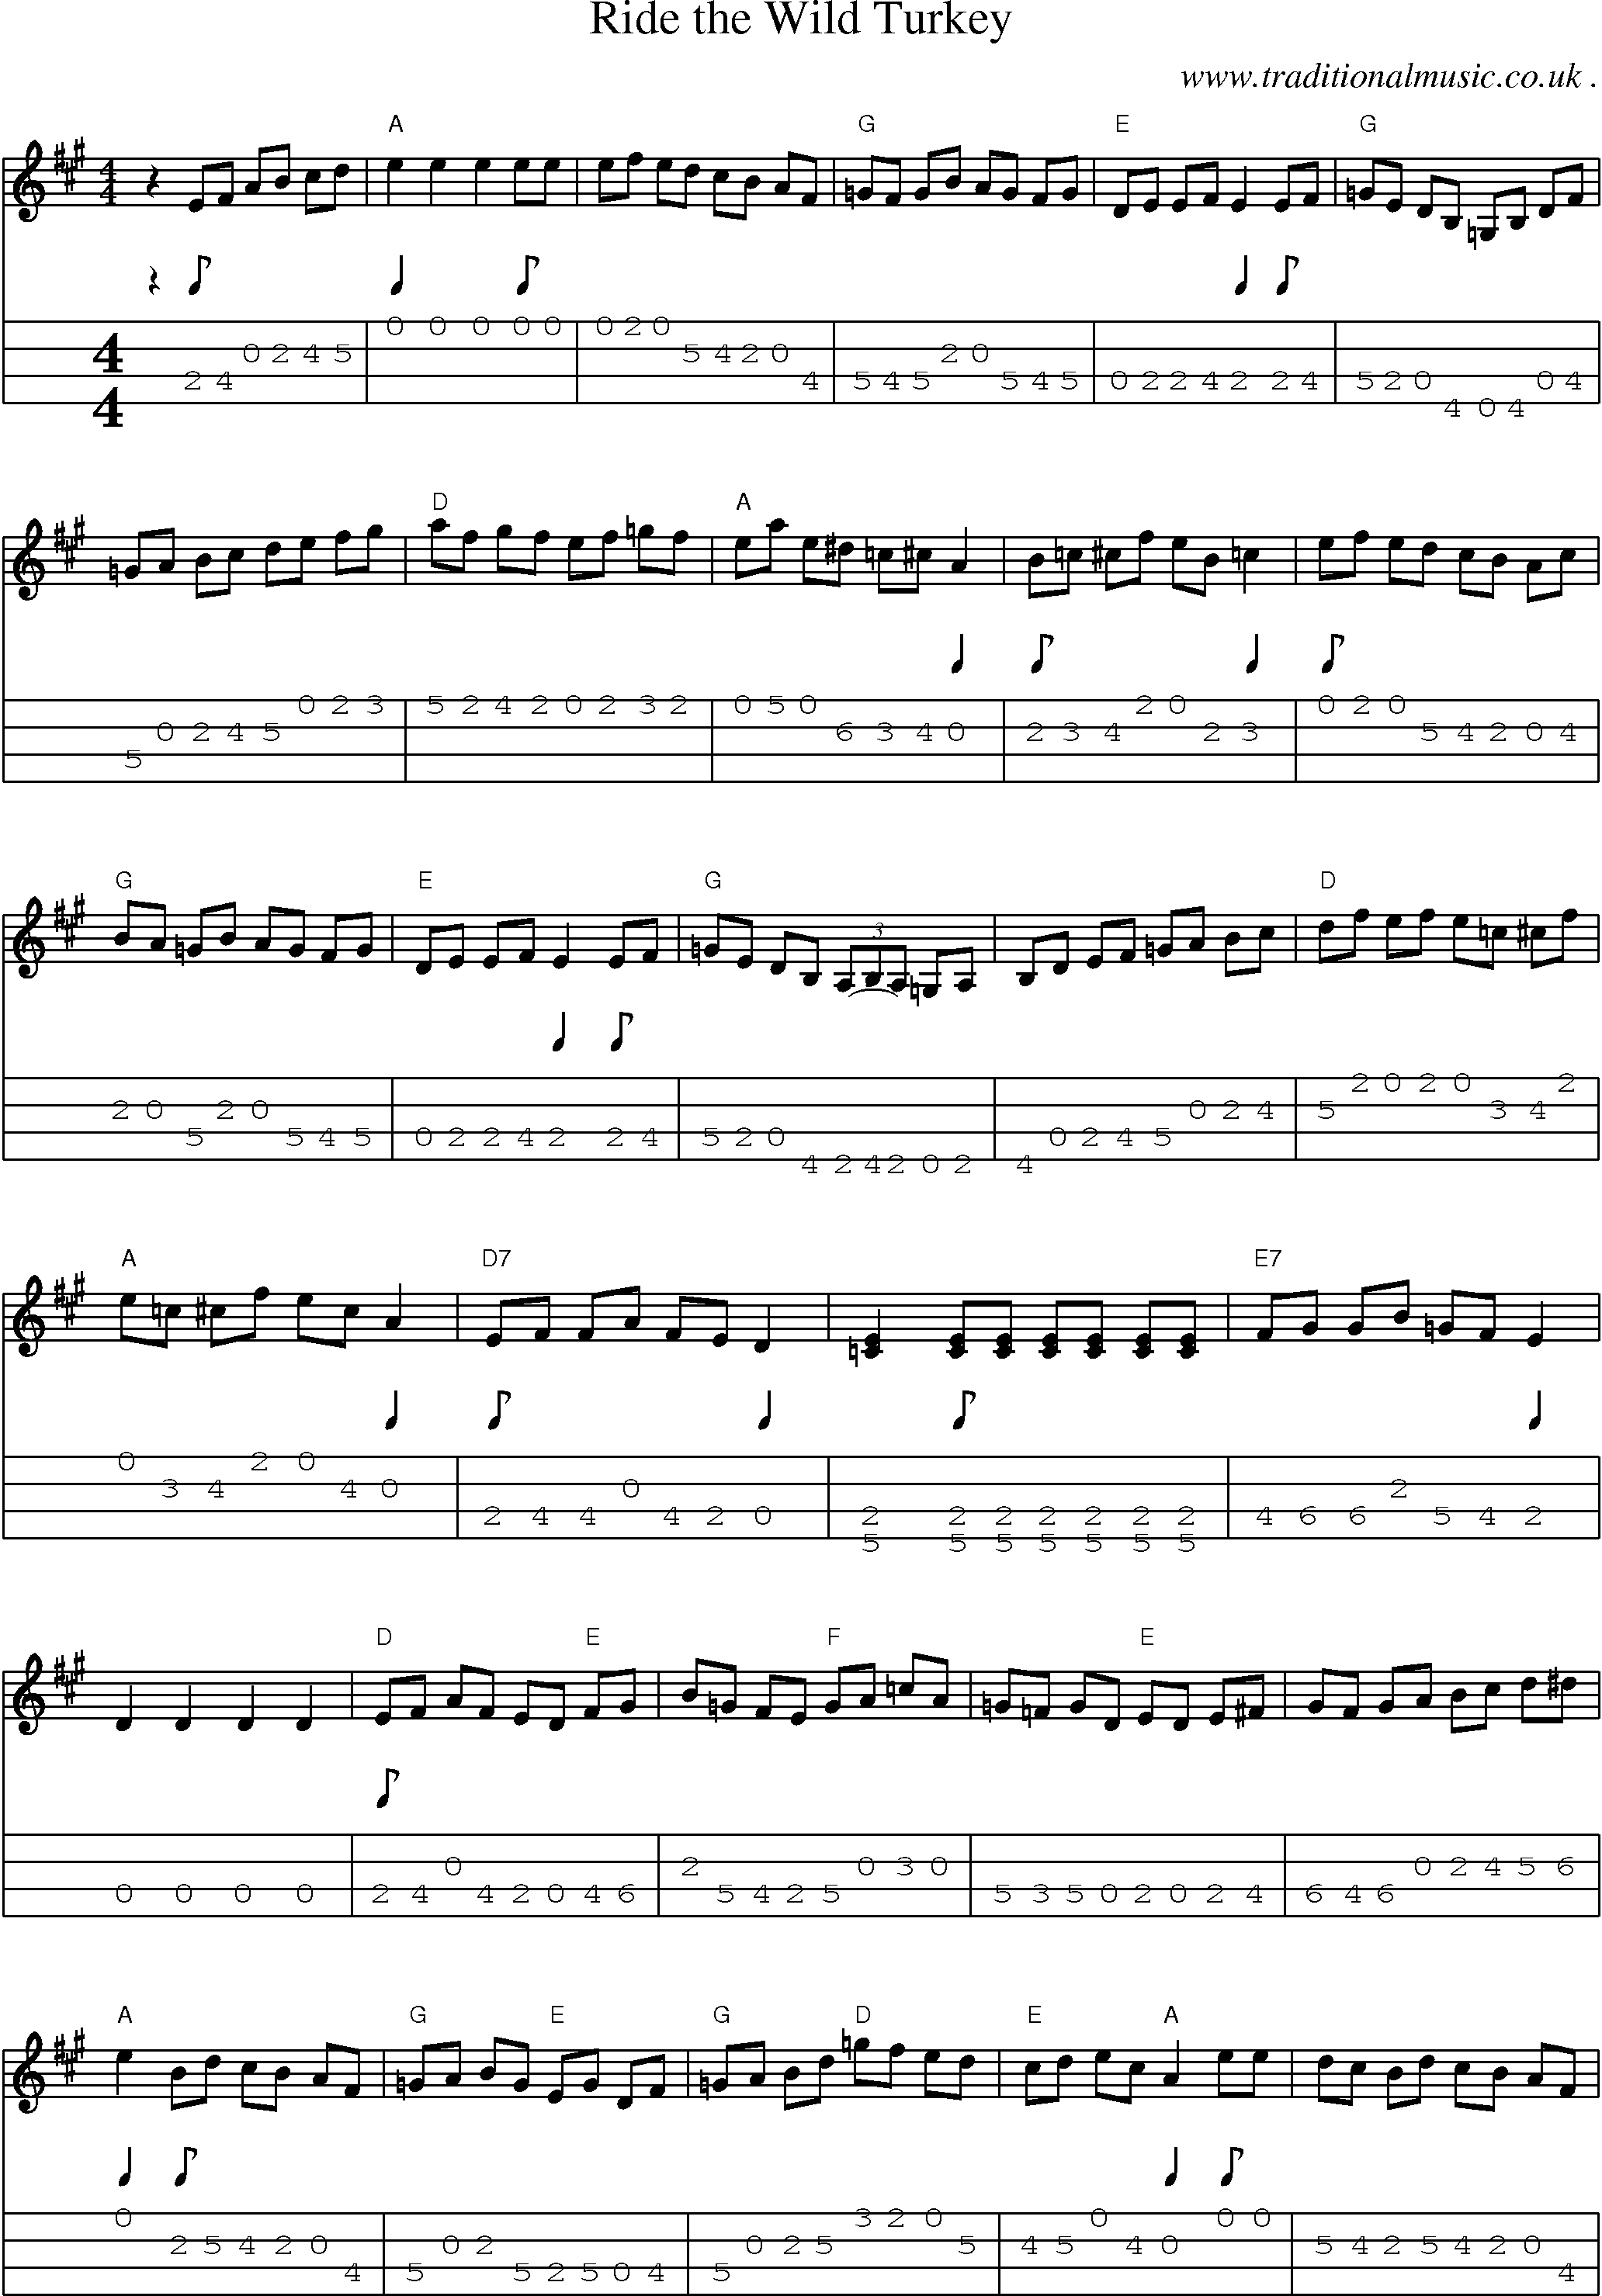 Music Score and Guitar Tabs for Ride The Wild Turkey